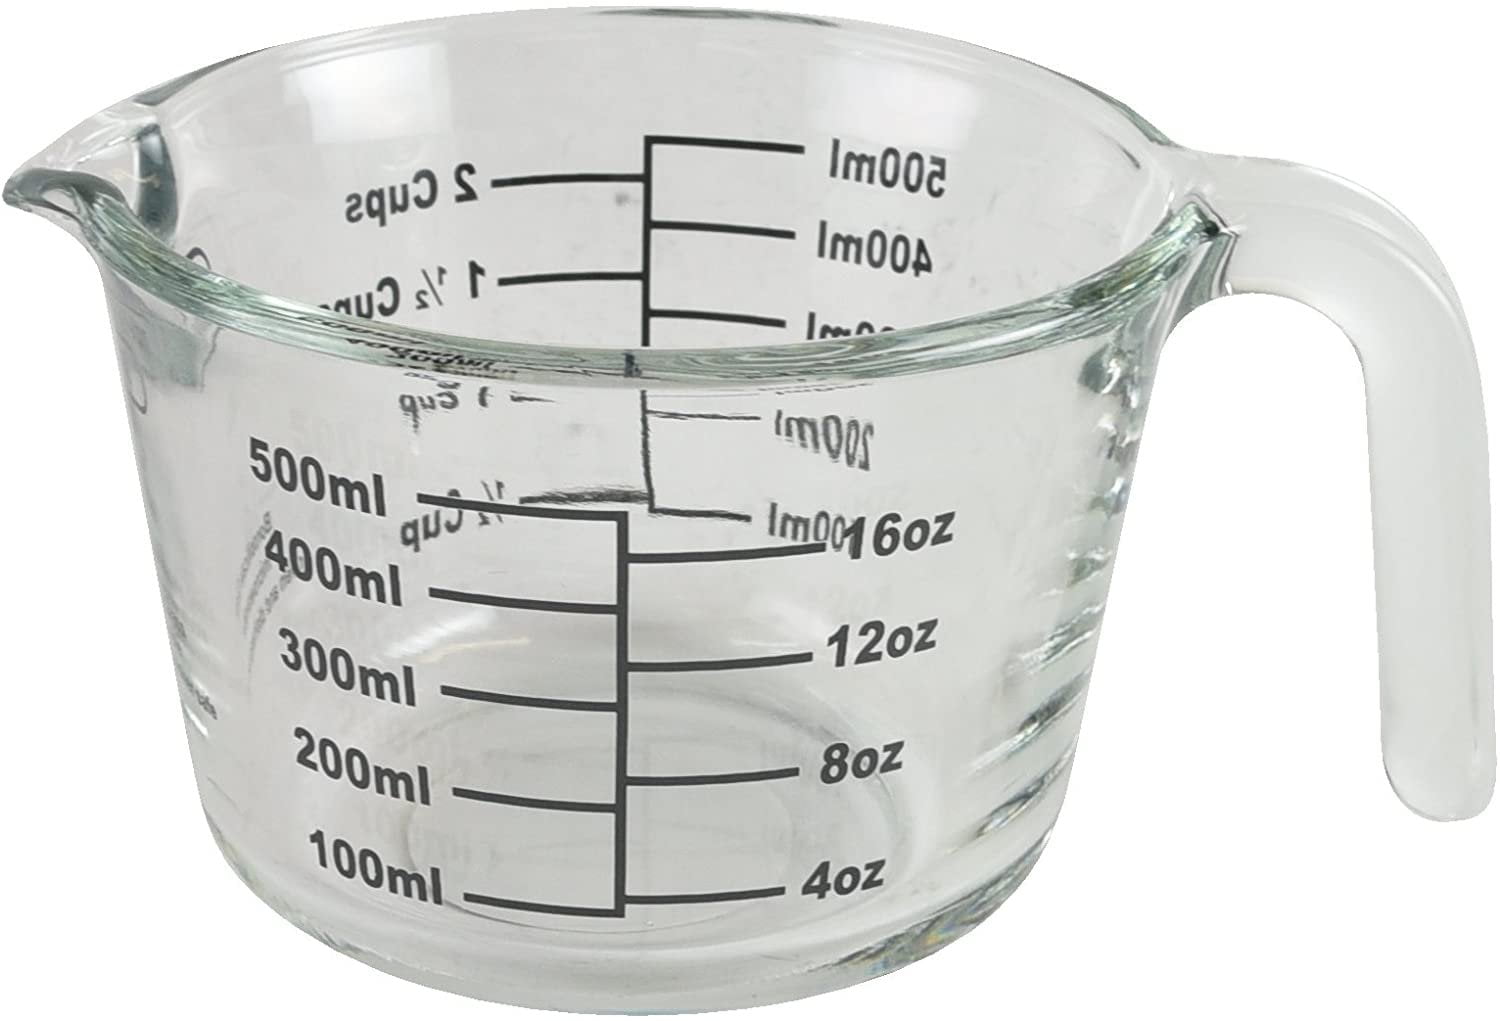 Farberware 4-Cup Borosilicate Glass Wet and Dry Measuring Cup with  Oversized Measurements, Clear & Reviews